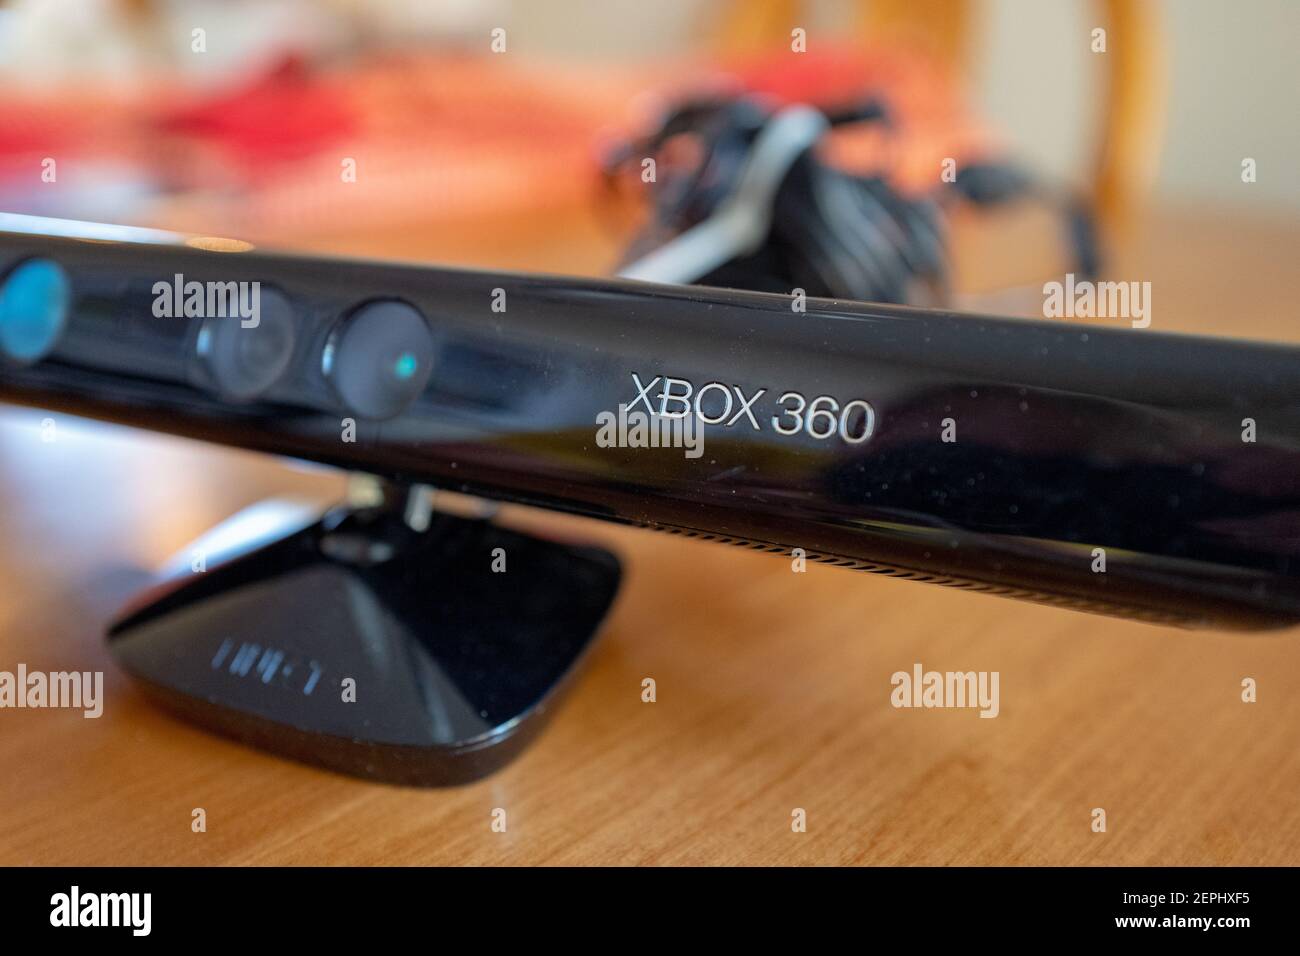 Close-up of first generation Xbox 360 Kinect motion sensing gaming  controller, a low-cost depth camera designed to allow gesture control of  Microsoft Xbox video game systems, ca 2010, in domestic room, August